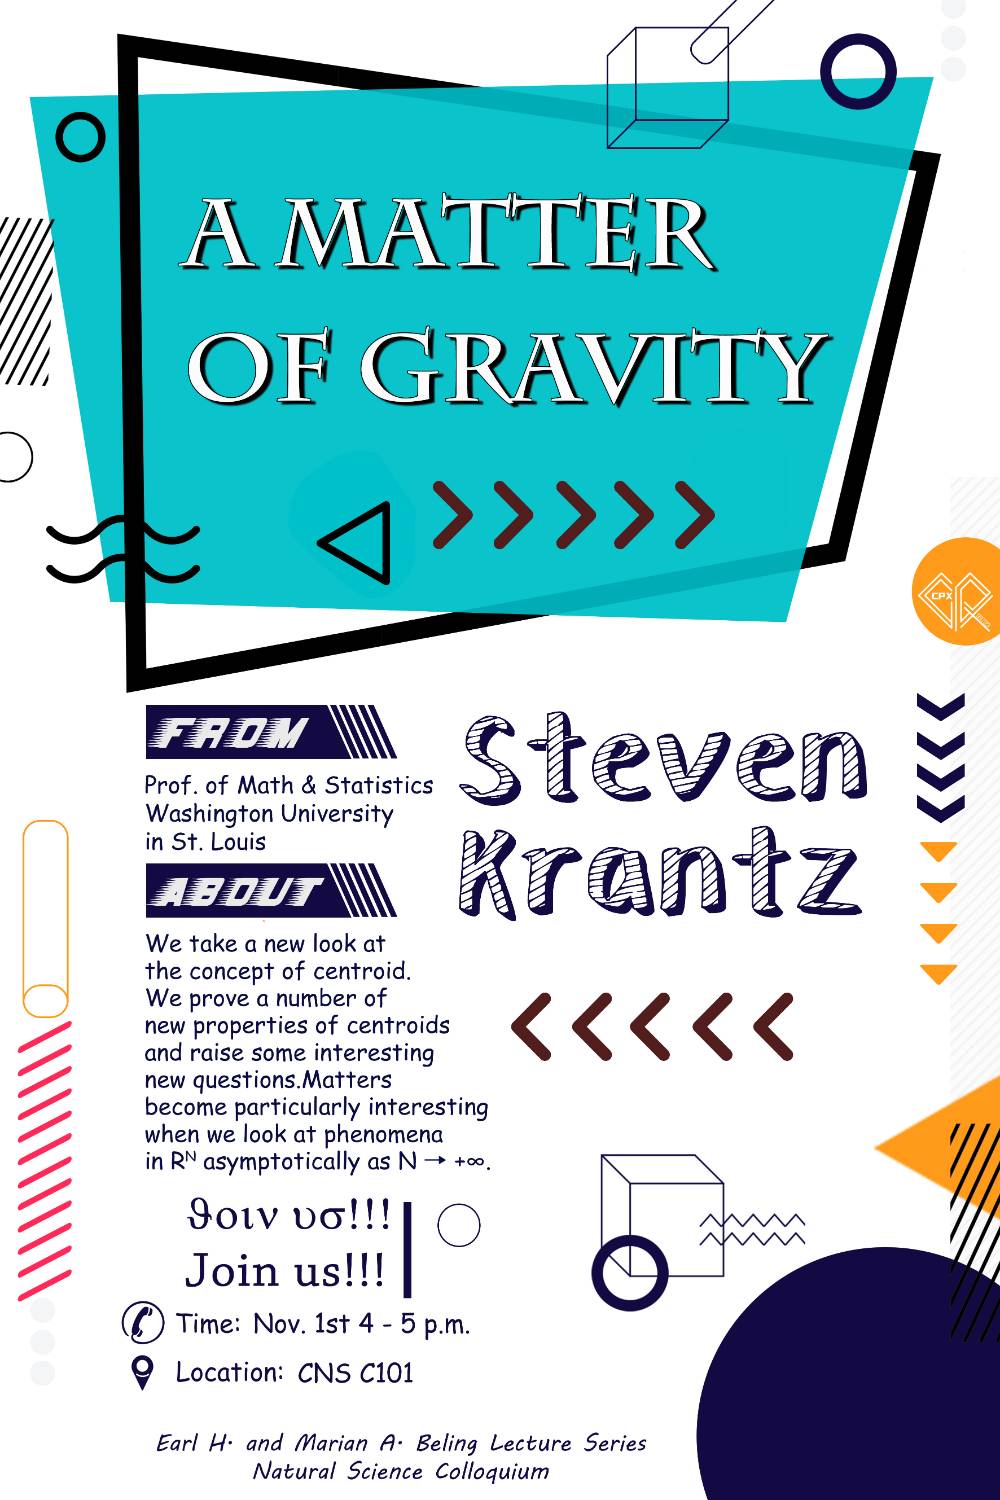 A Matter of Gravity lecture on Nov 1 4-5 PM